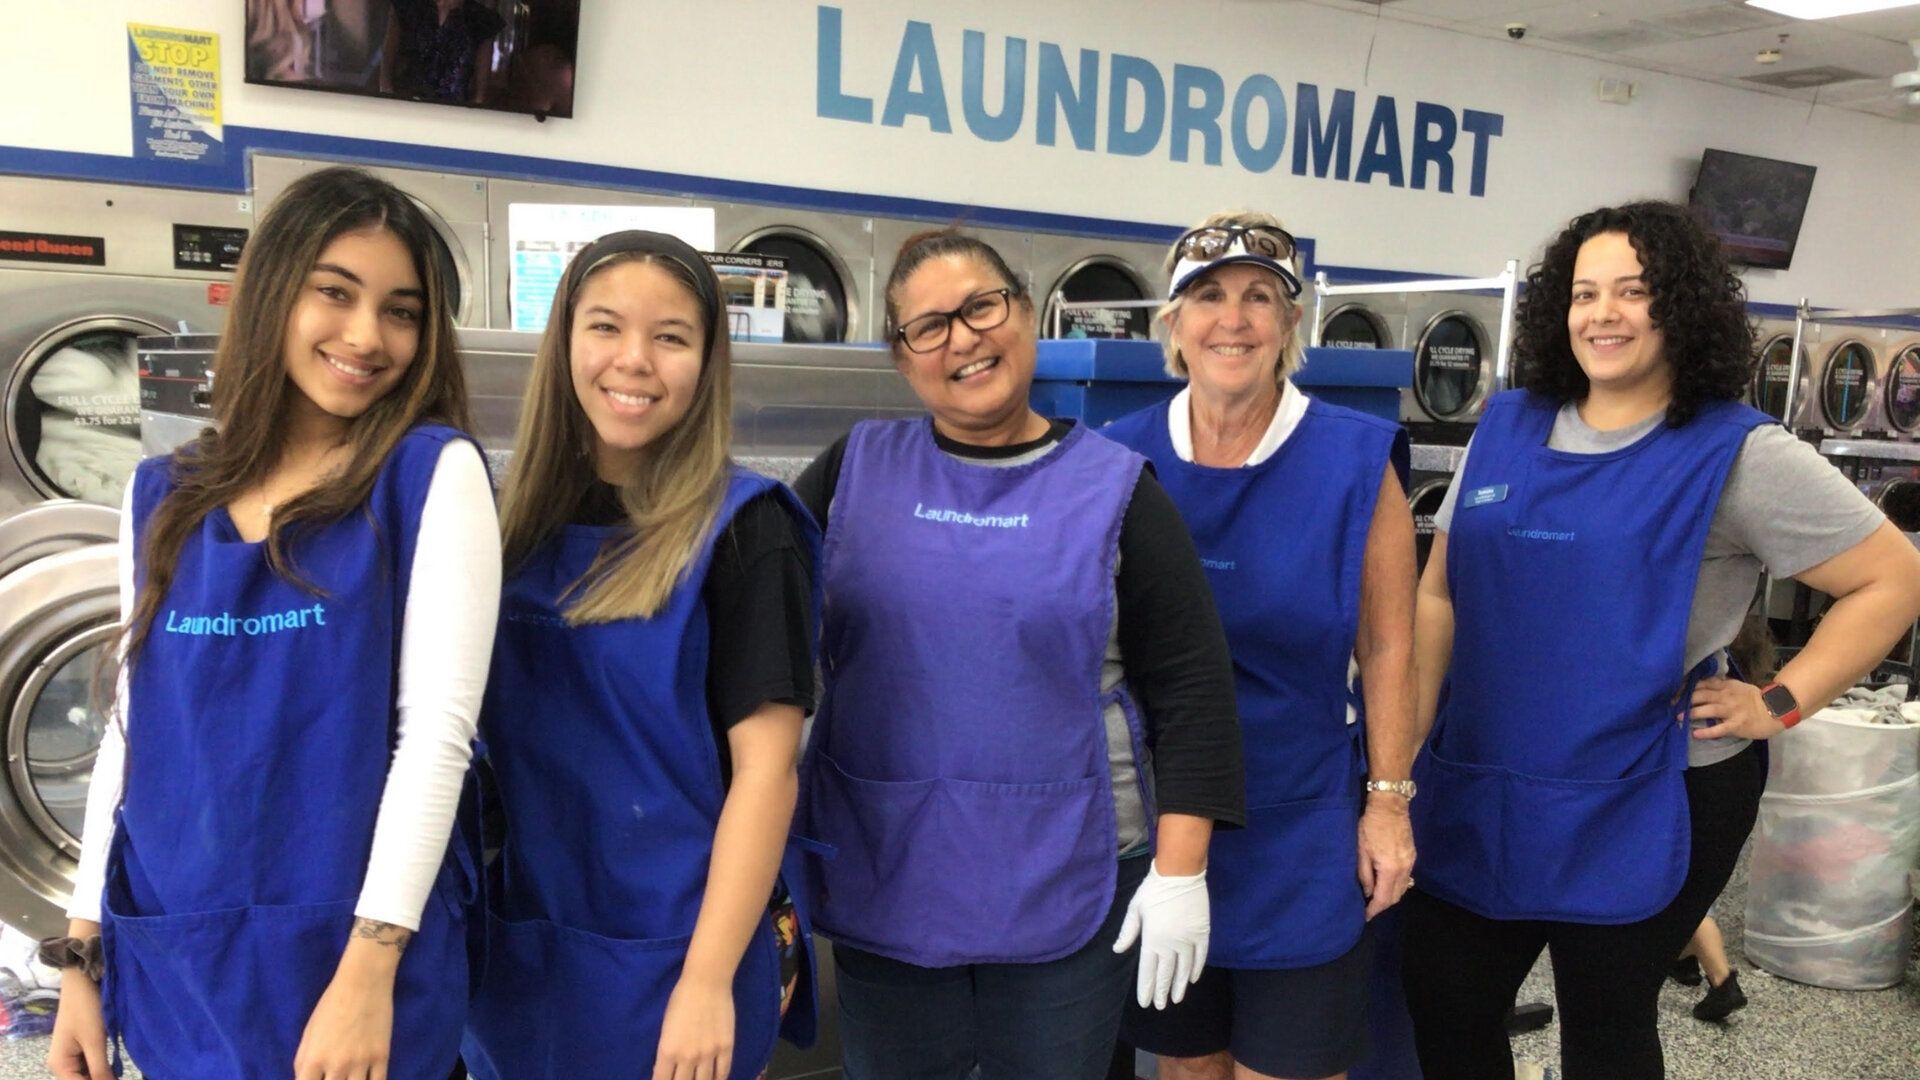 Laundromart of Four Corners coin laundry